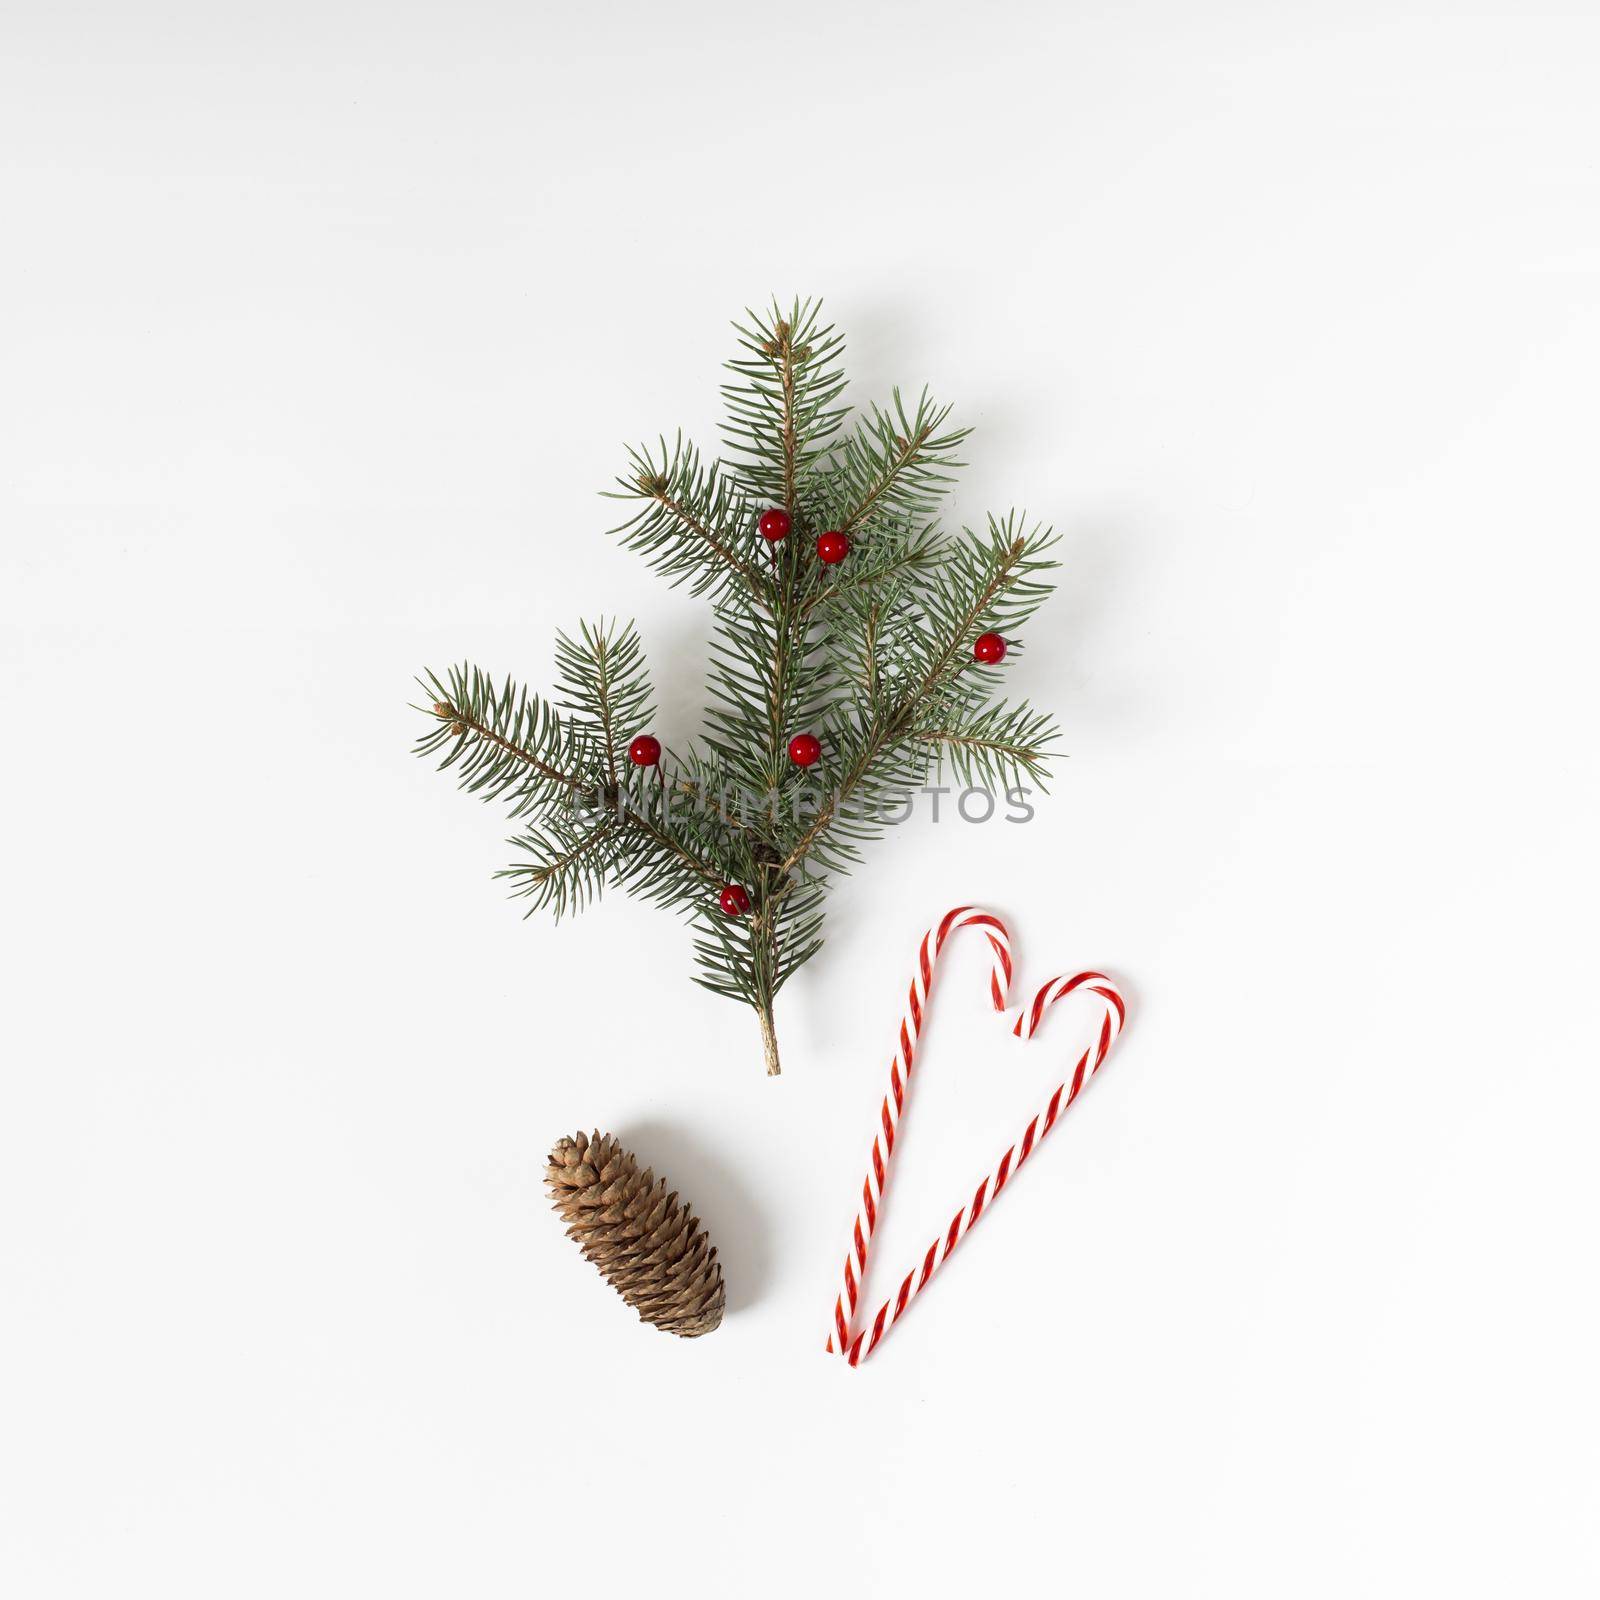 fir tree branch with candy cane cone by Zahard